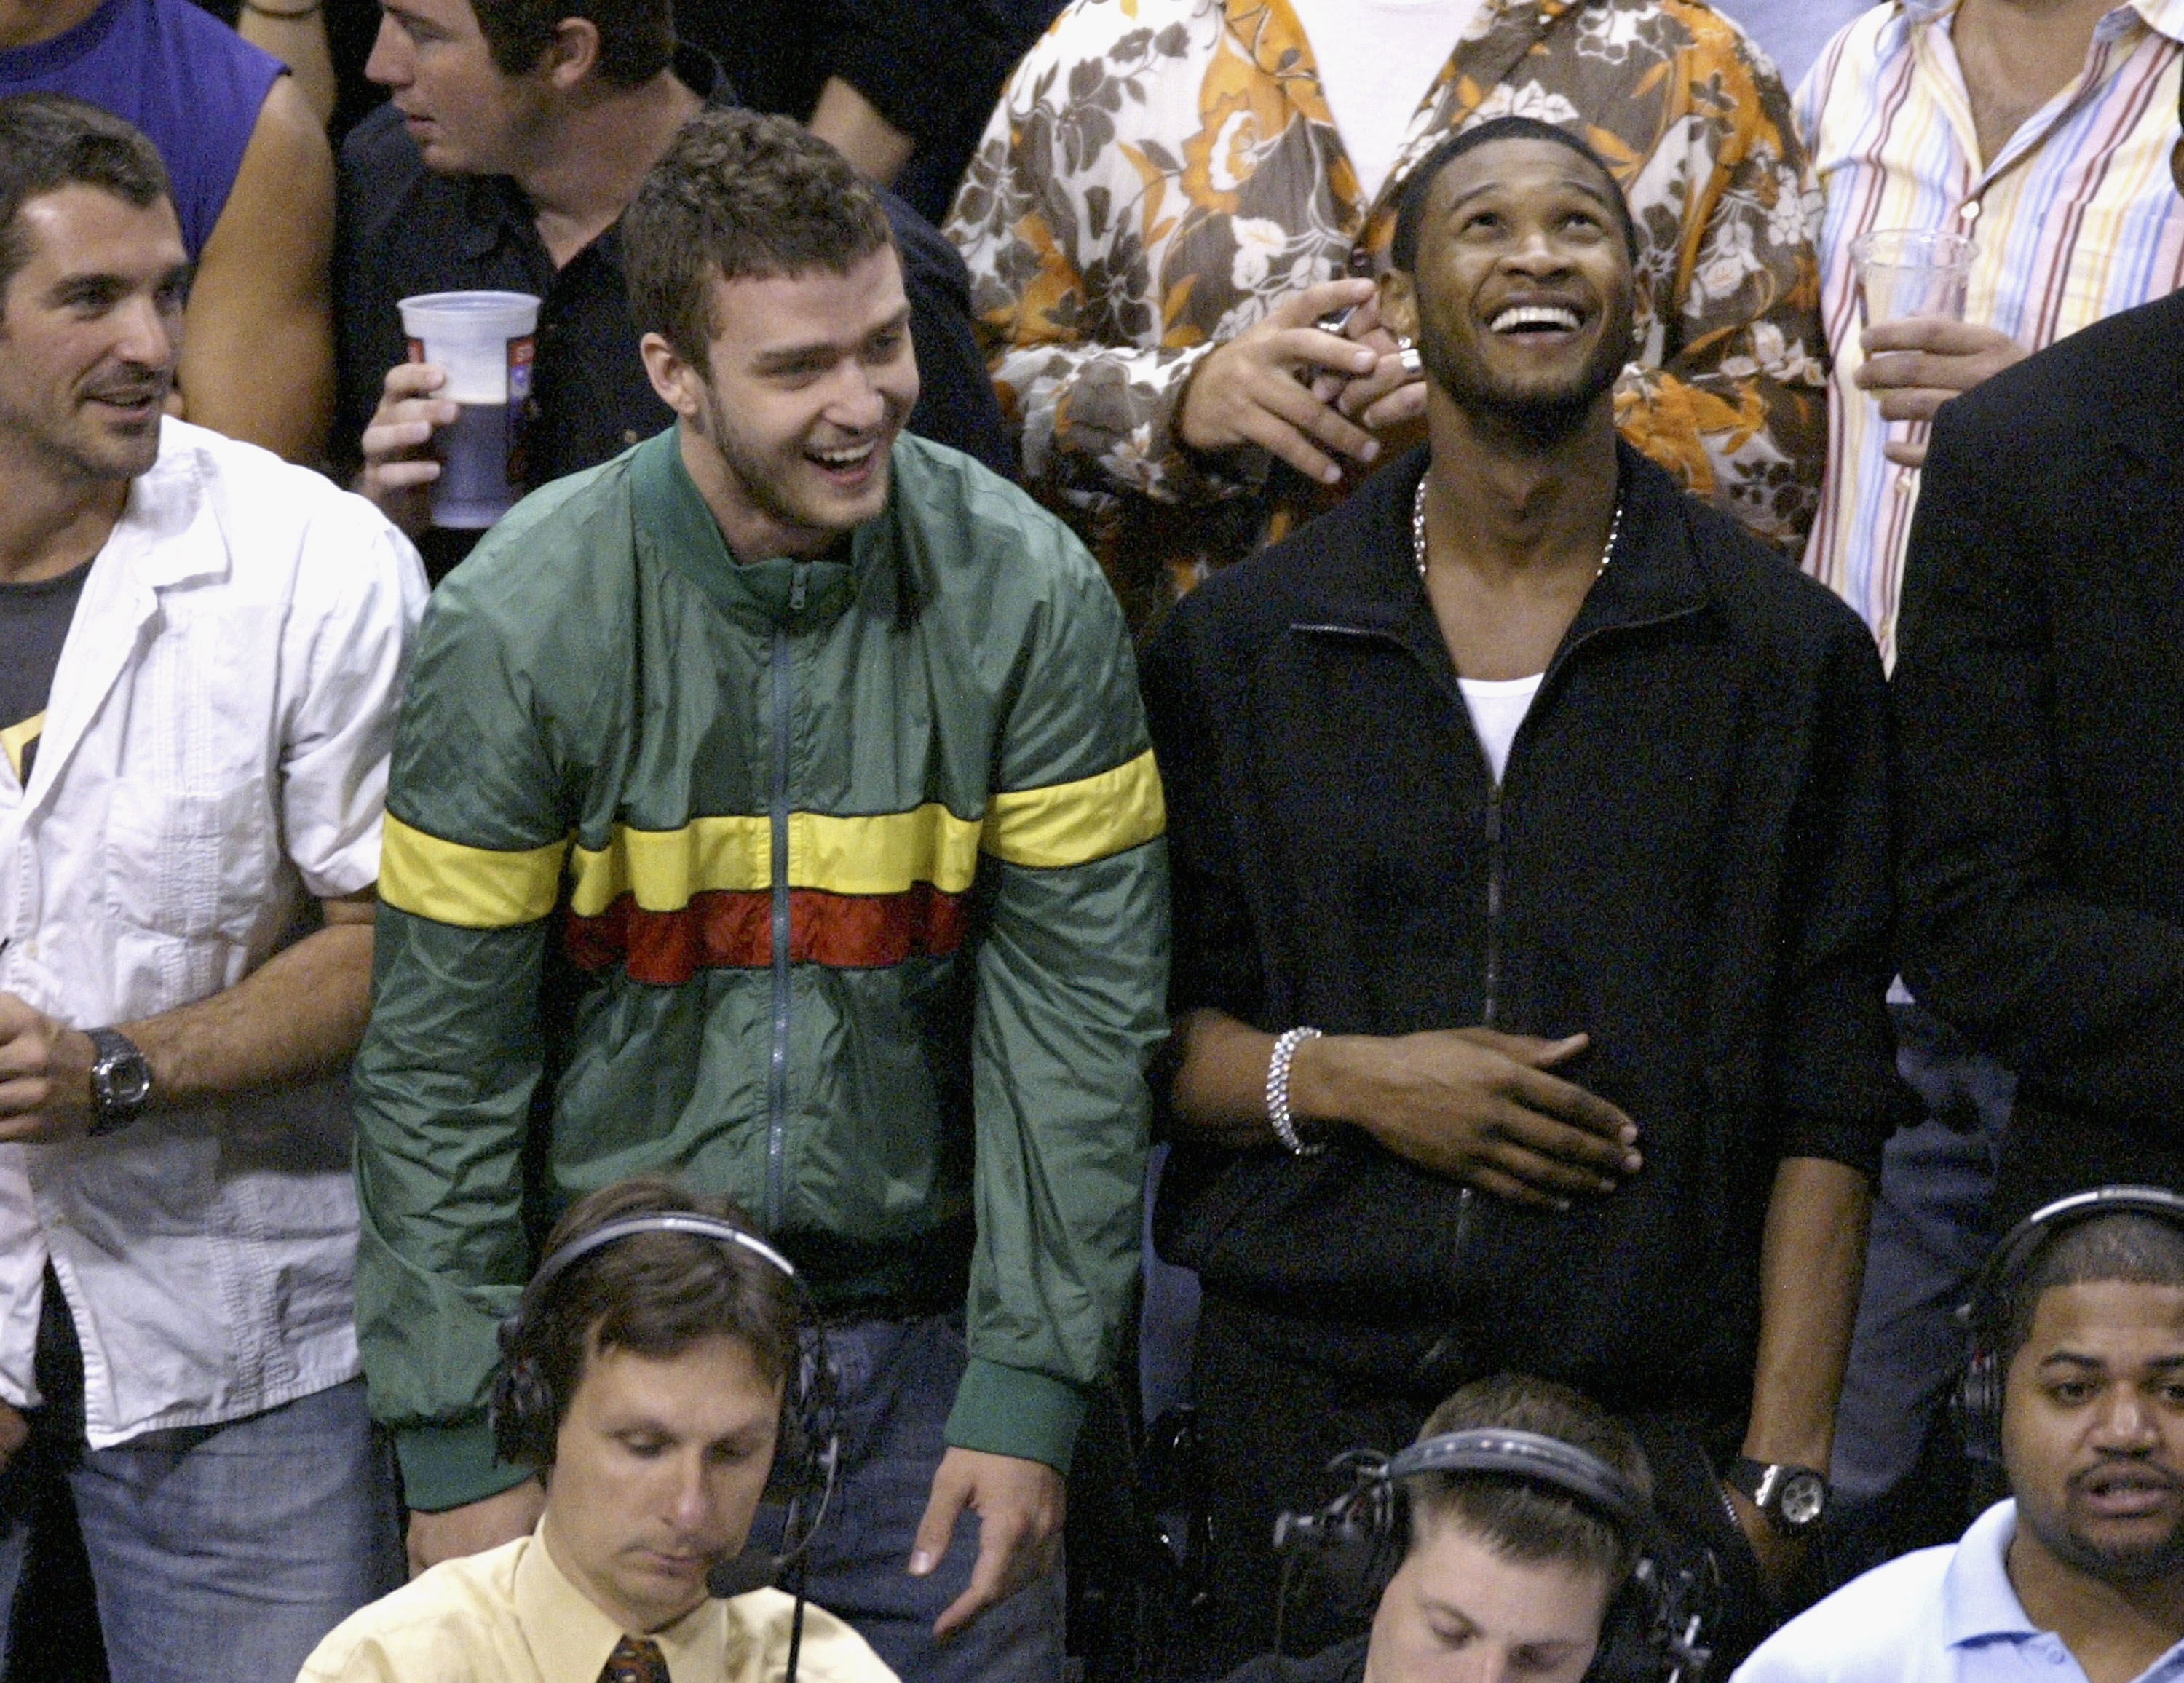 justin timberlake and usher smiling and standing up at a sports event